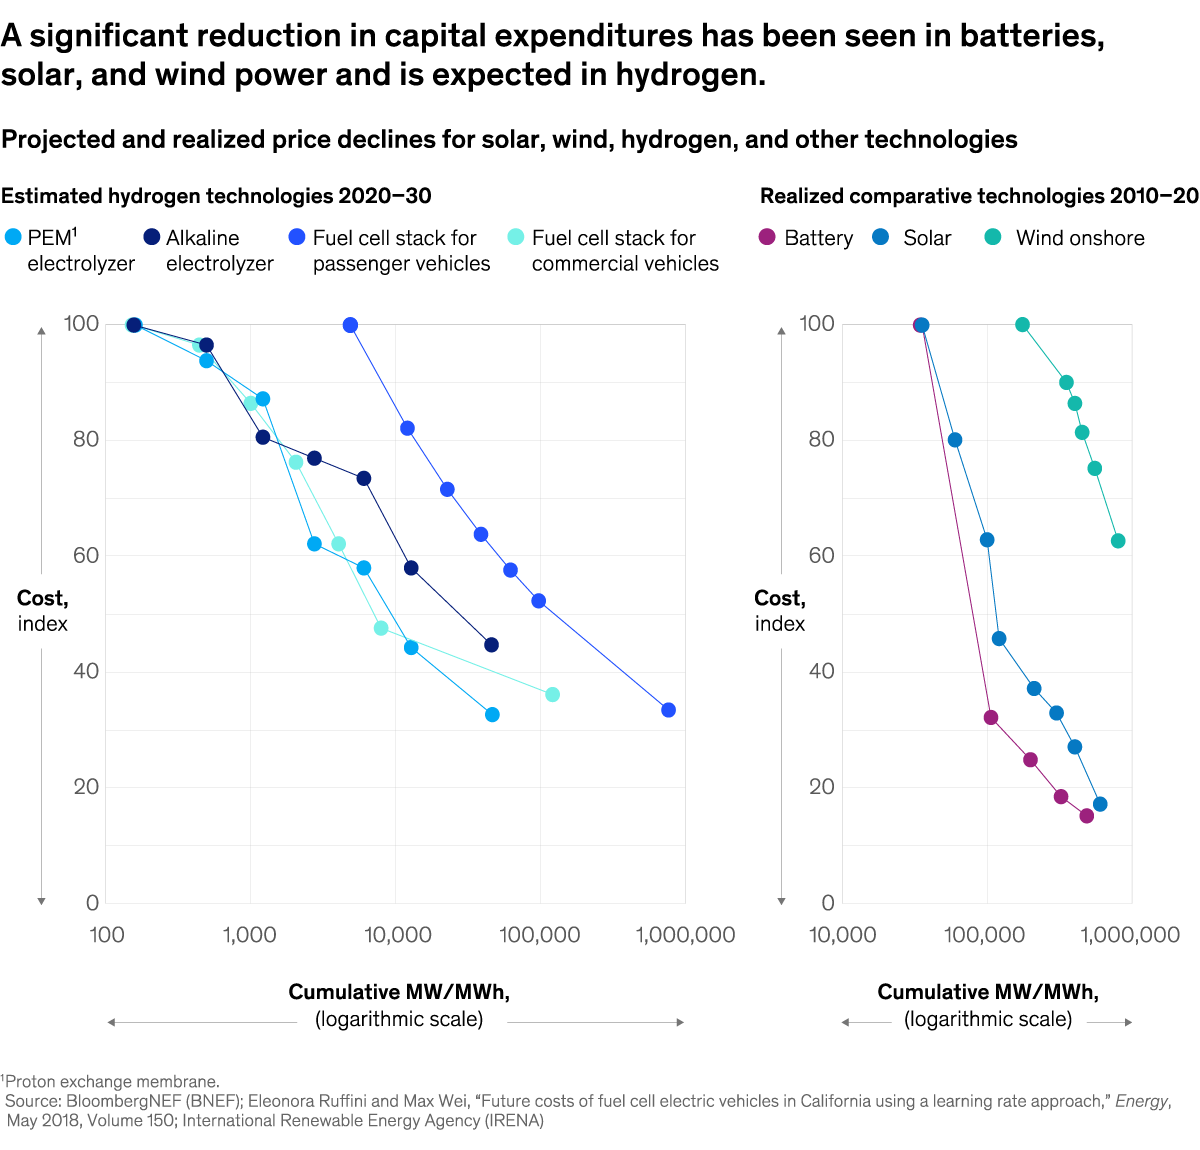 A chart titled “A significant reduction in capital expenditures has been seen in batteries, solar, and wind power and is expected in hydrogen.” Click to open the full article on McKinsey.com.